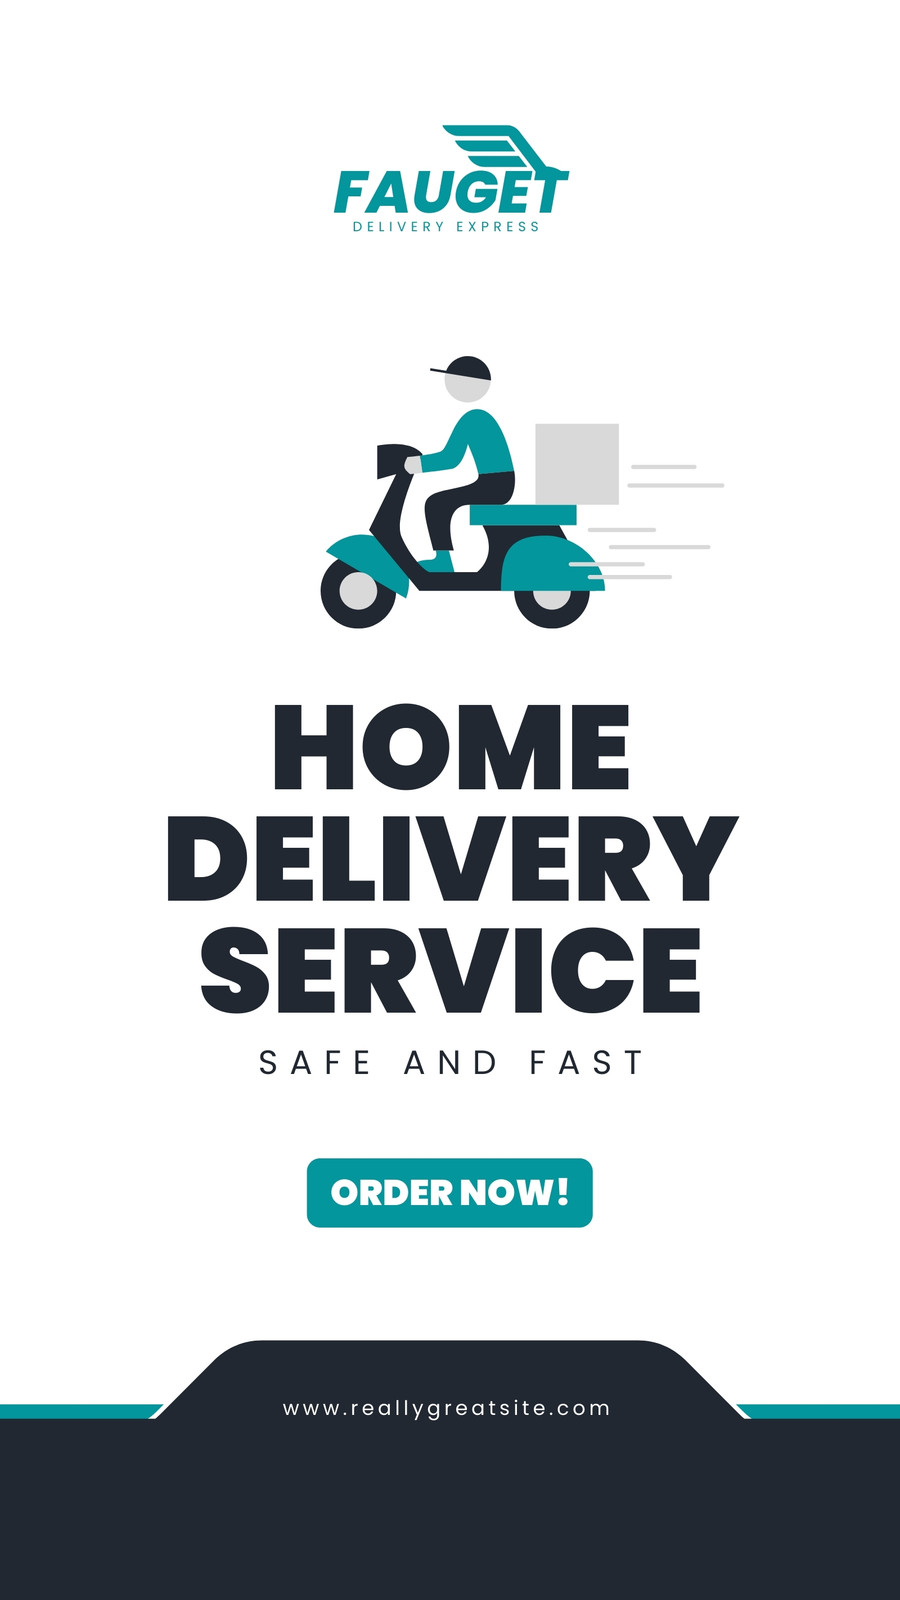 SAFE FAST EXPRESS SHIPPING - HOME